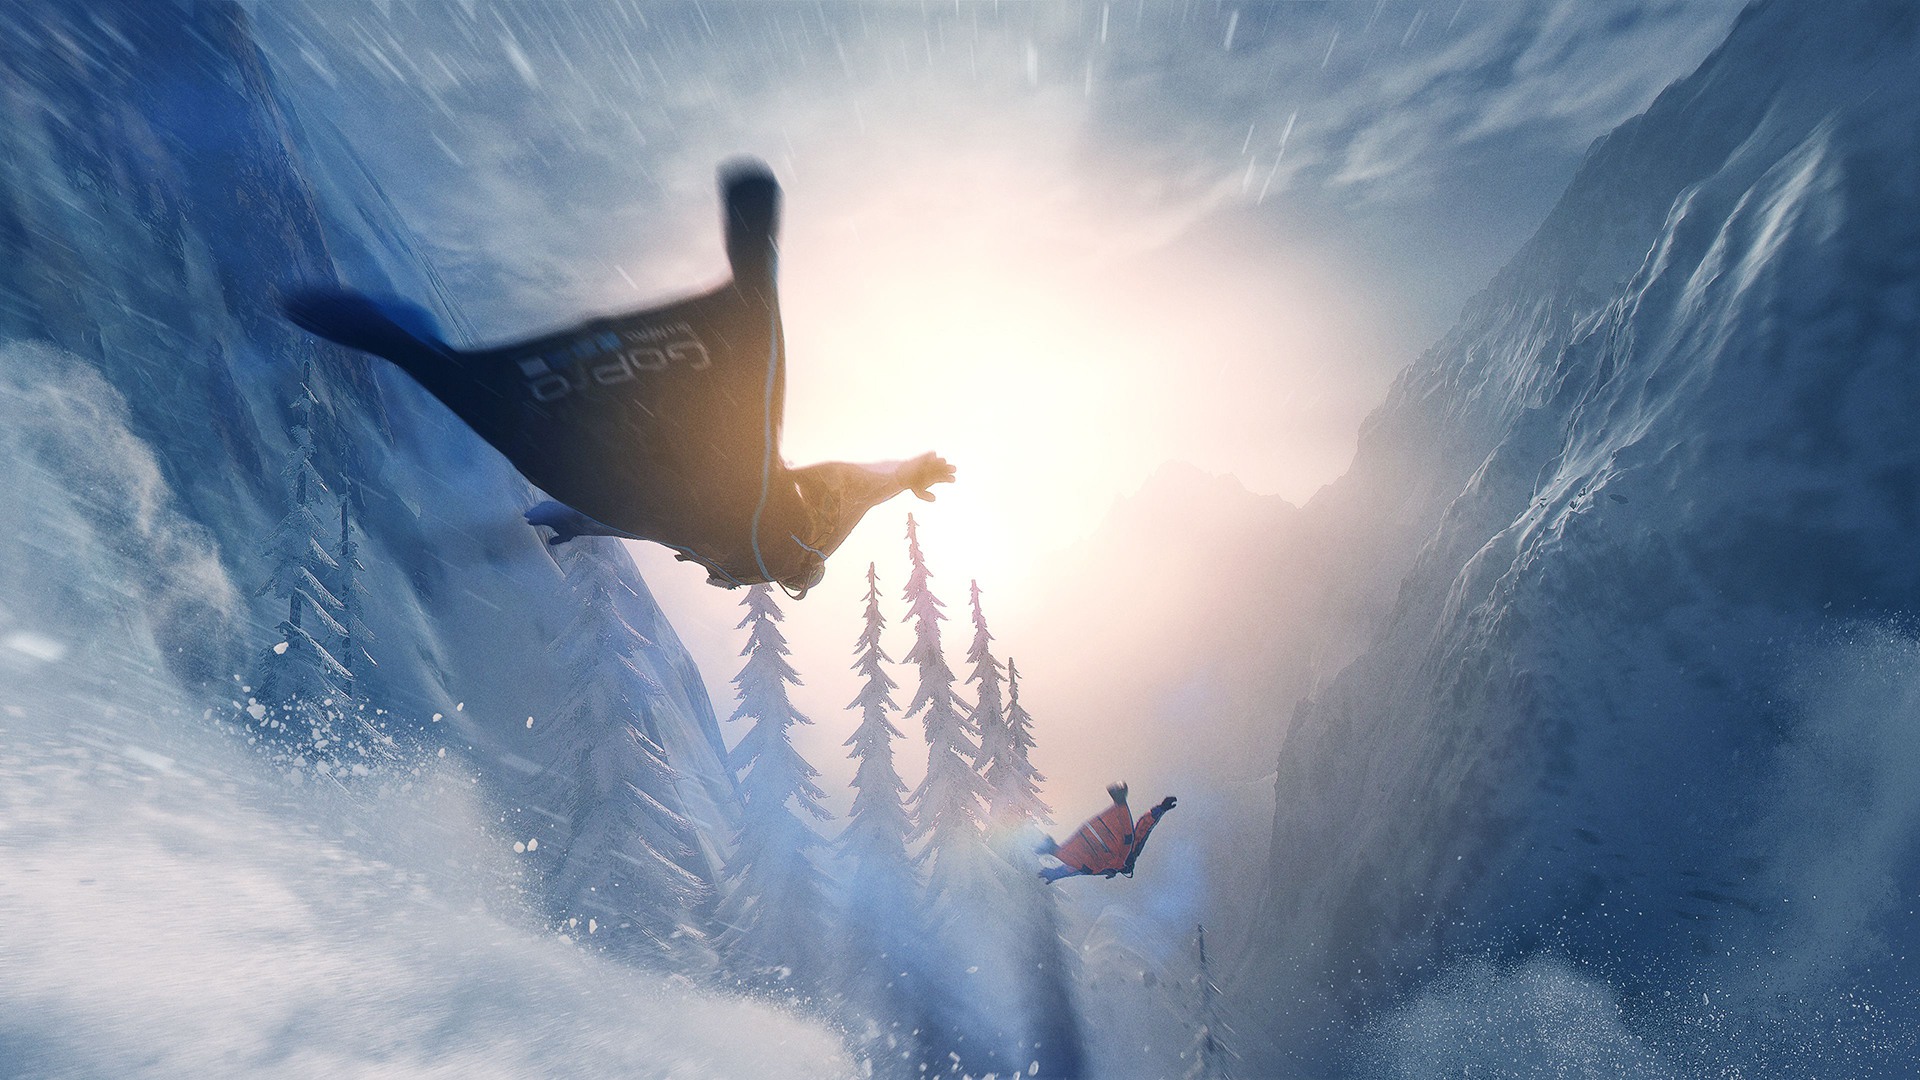 video game, steep, steep (video game) lock screen backgrounds